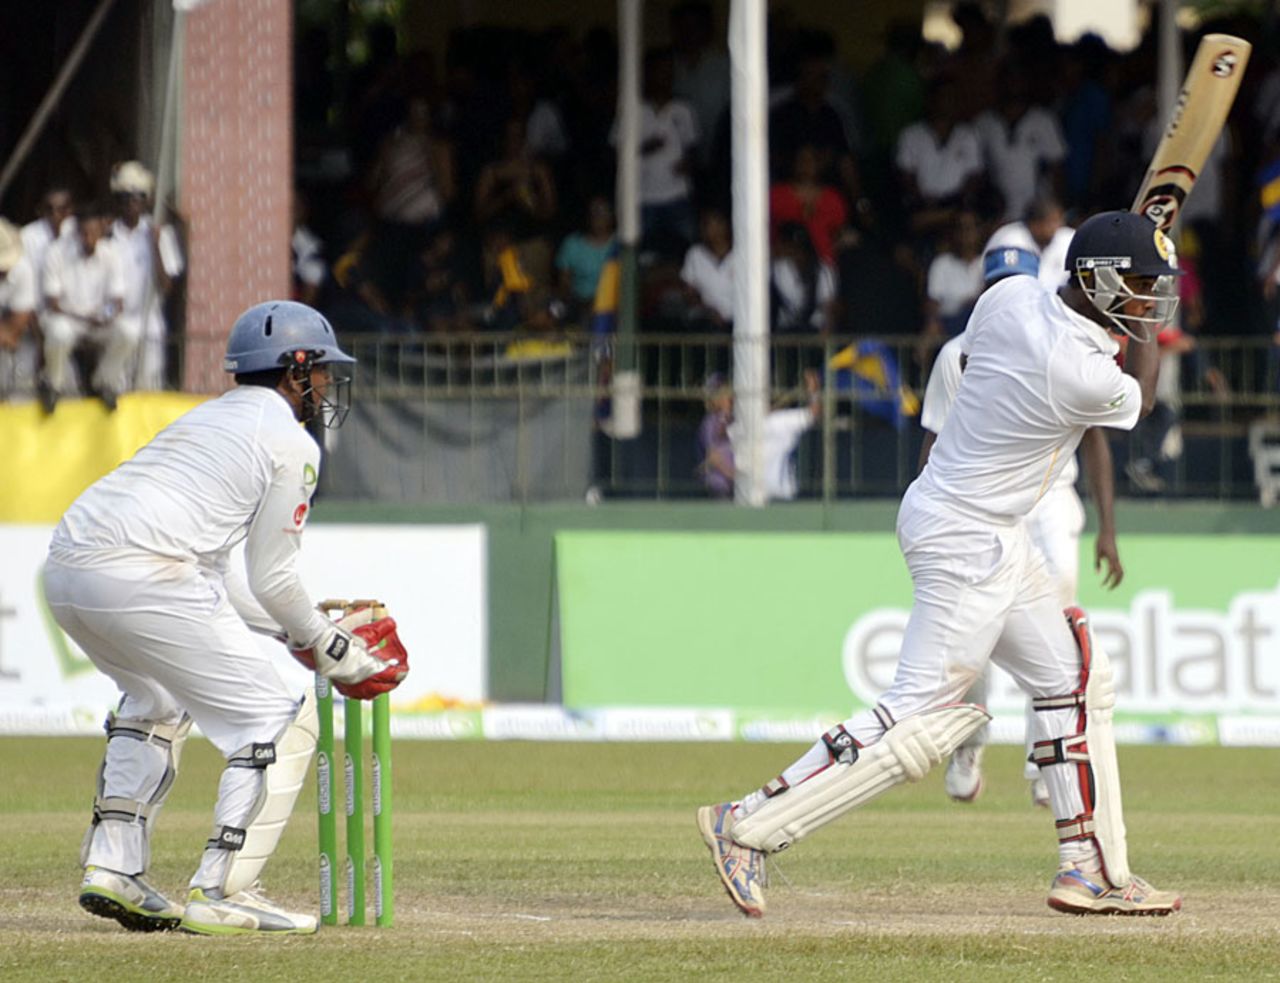 Hashen Ramanayake drives during his 96, Royal College v S.Thomas' College, 135th Battle of the Blues, 3rd day, Colombo, March 15, 2014